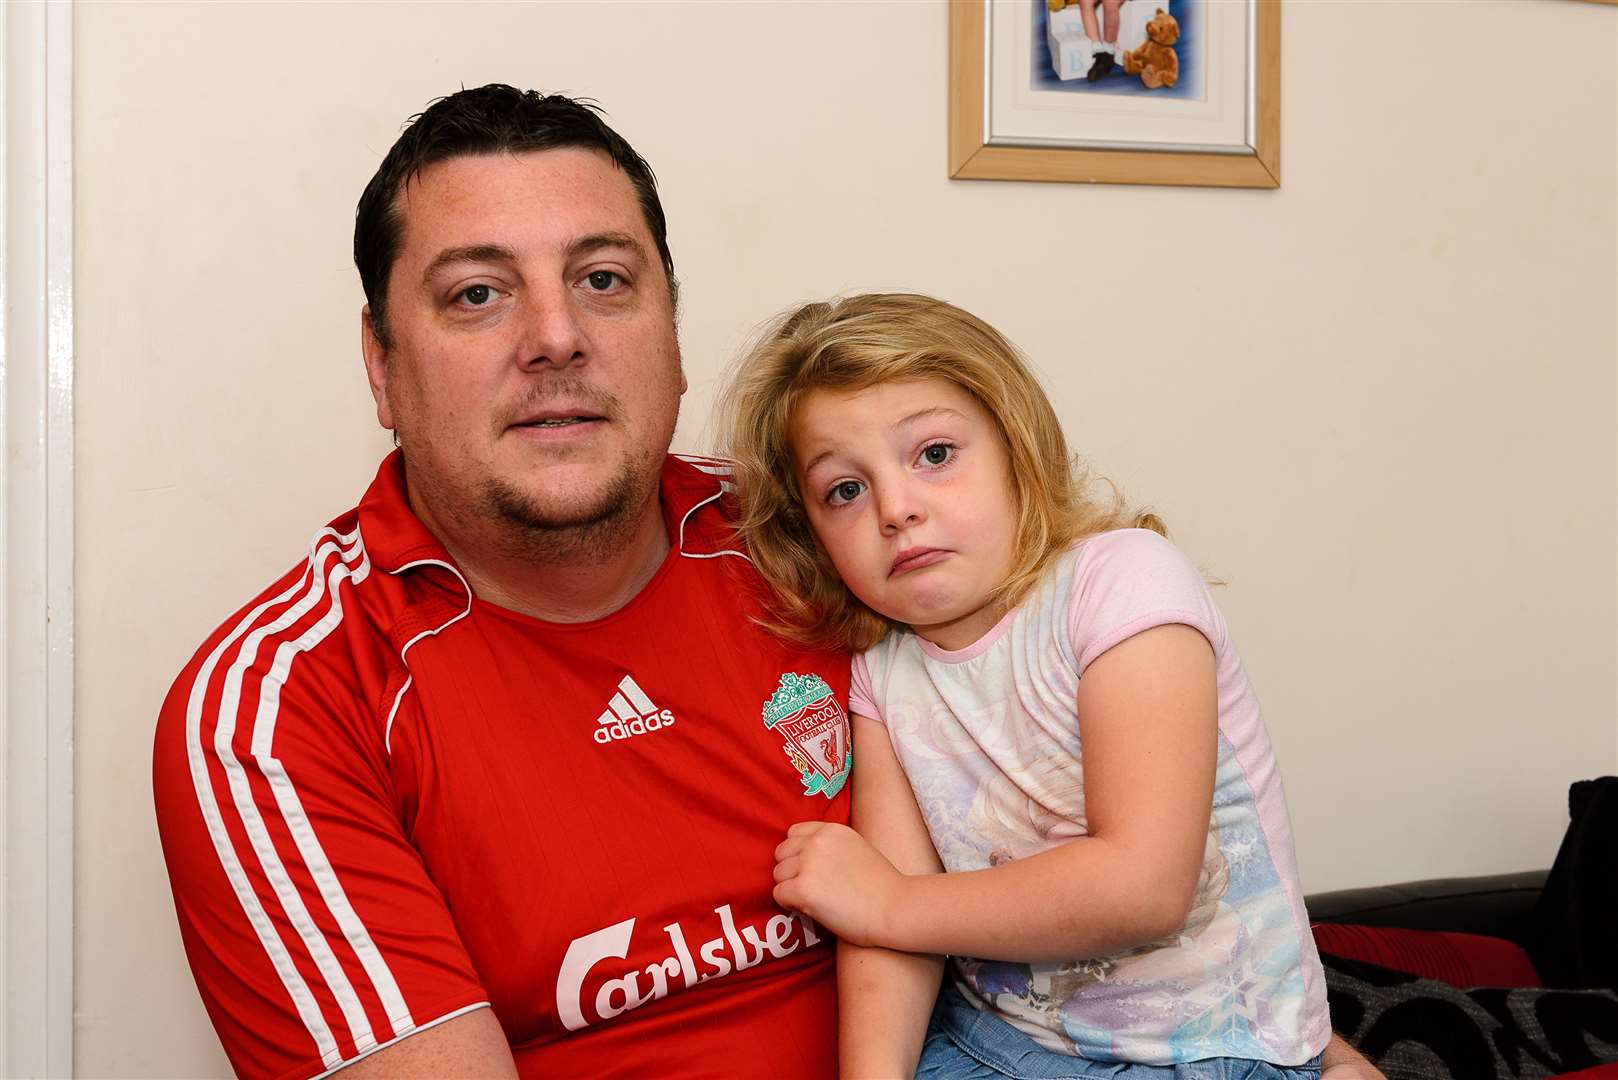 Adam De Lobel and his daughter, Ava-Rose, who injured her arm at Asda in Gravesend